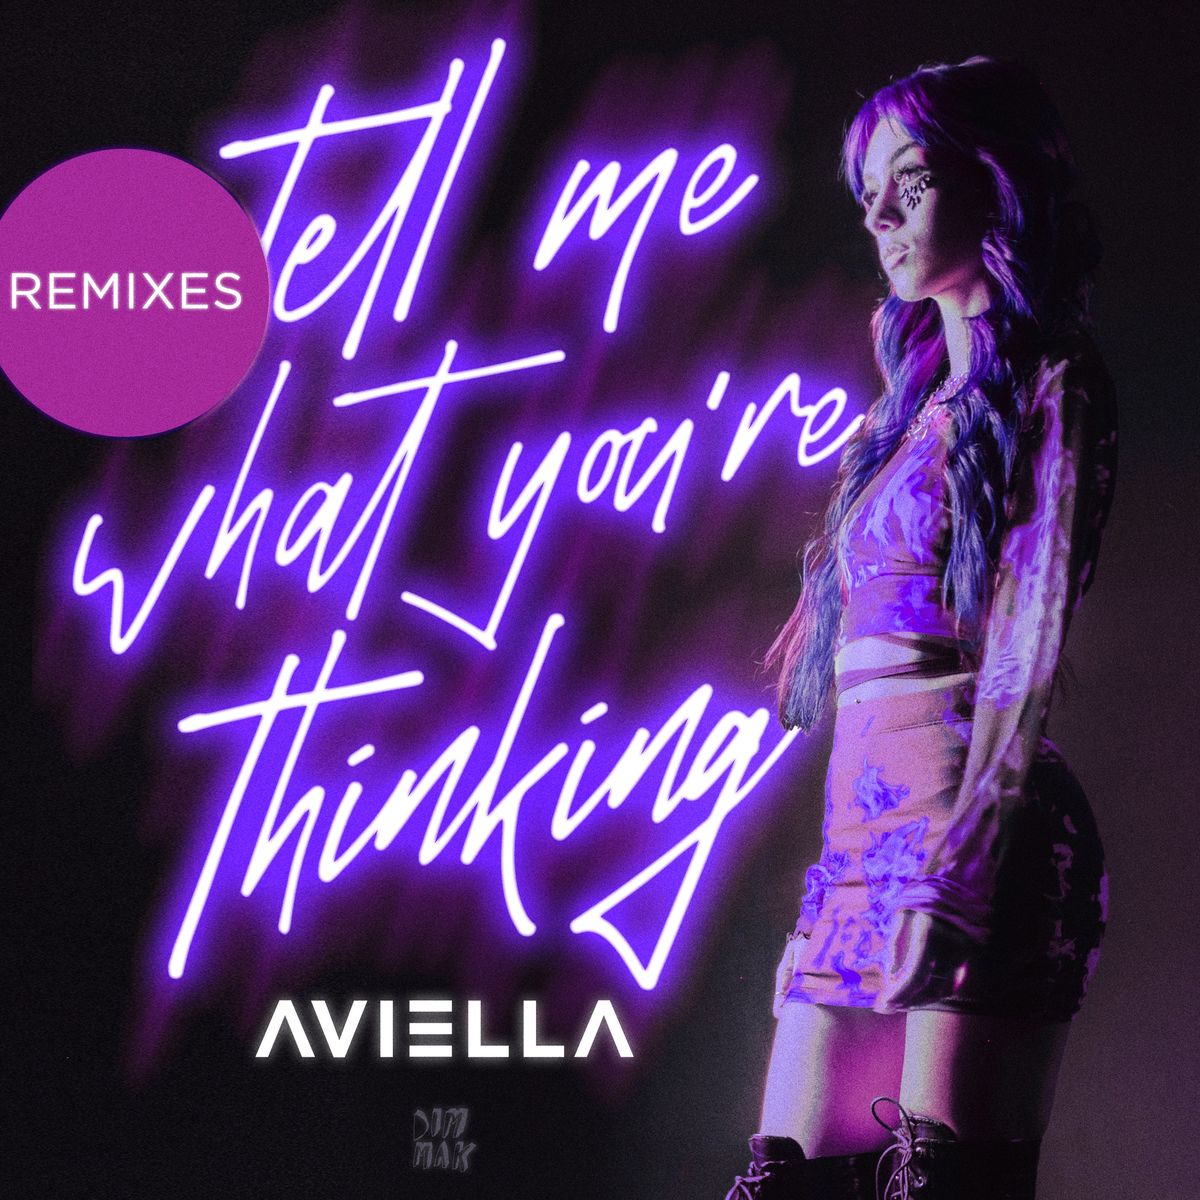 Aviella - tell me what you’re thinking (Disco Fries Remix)